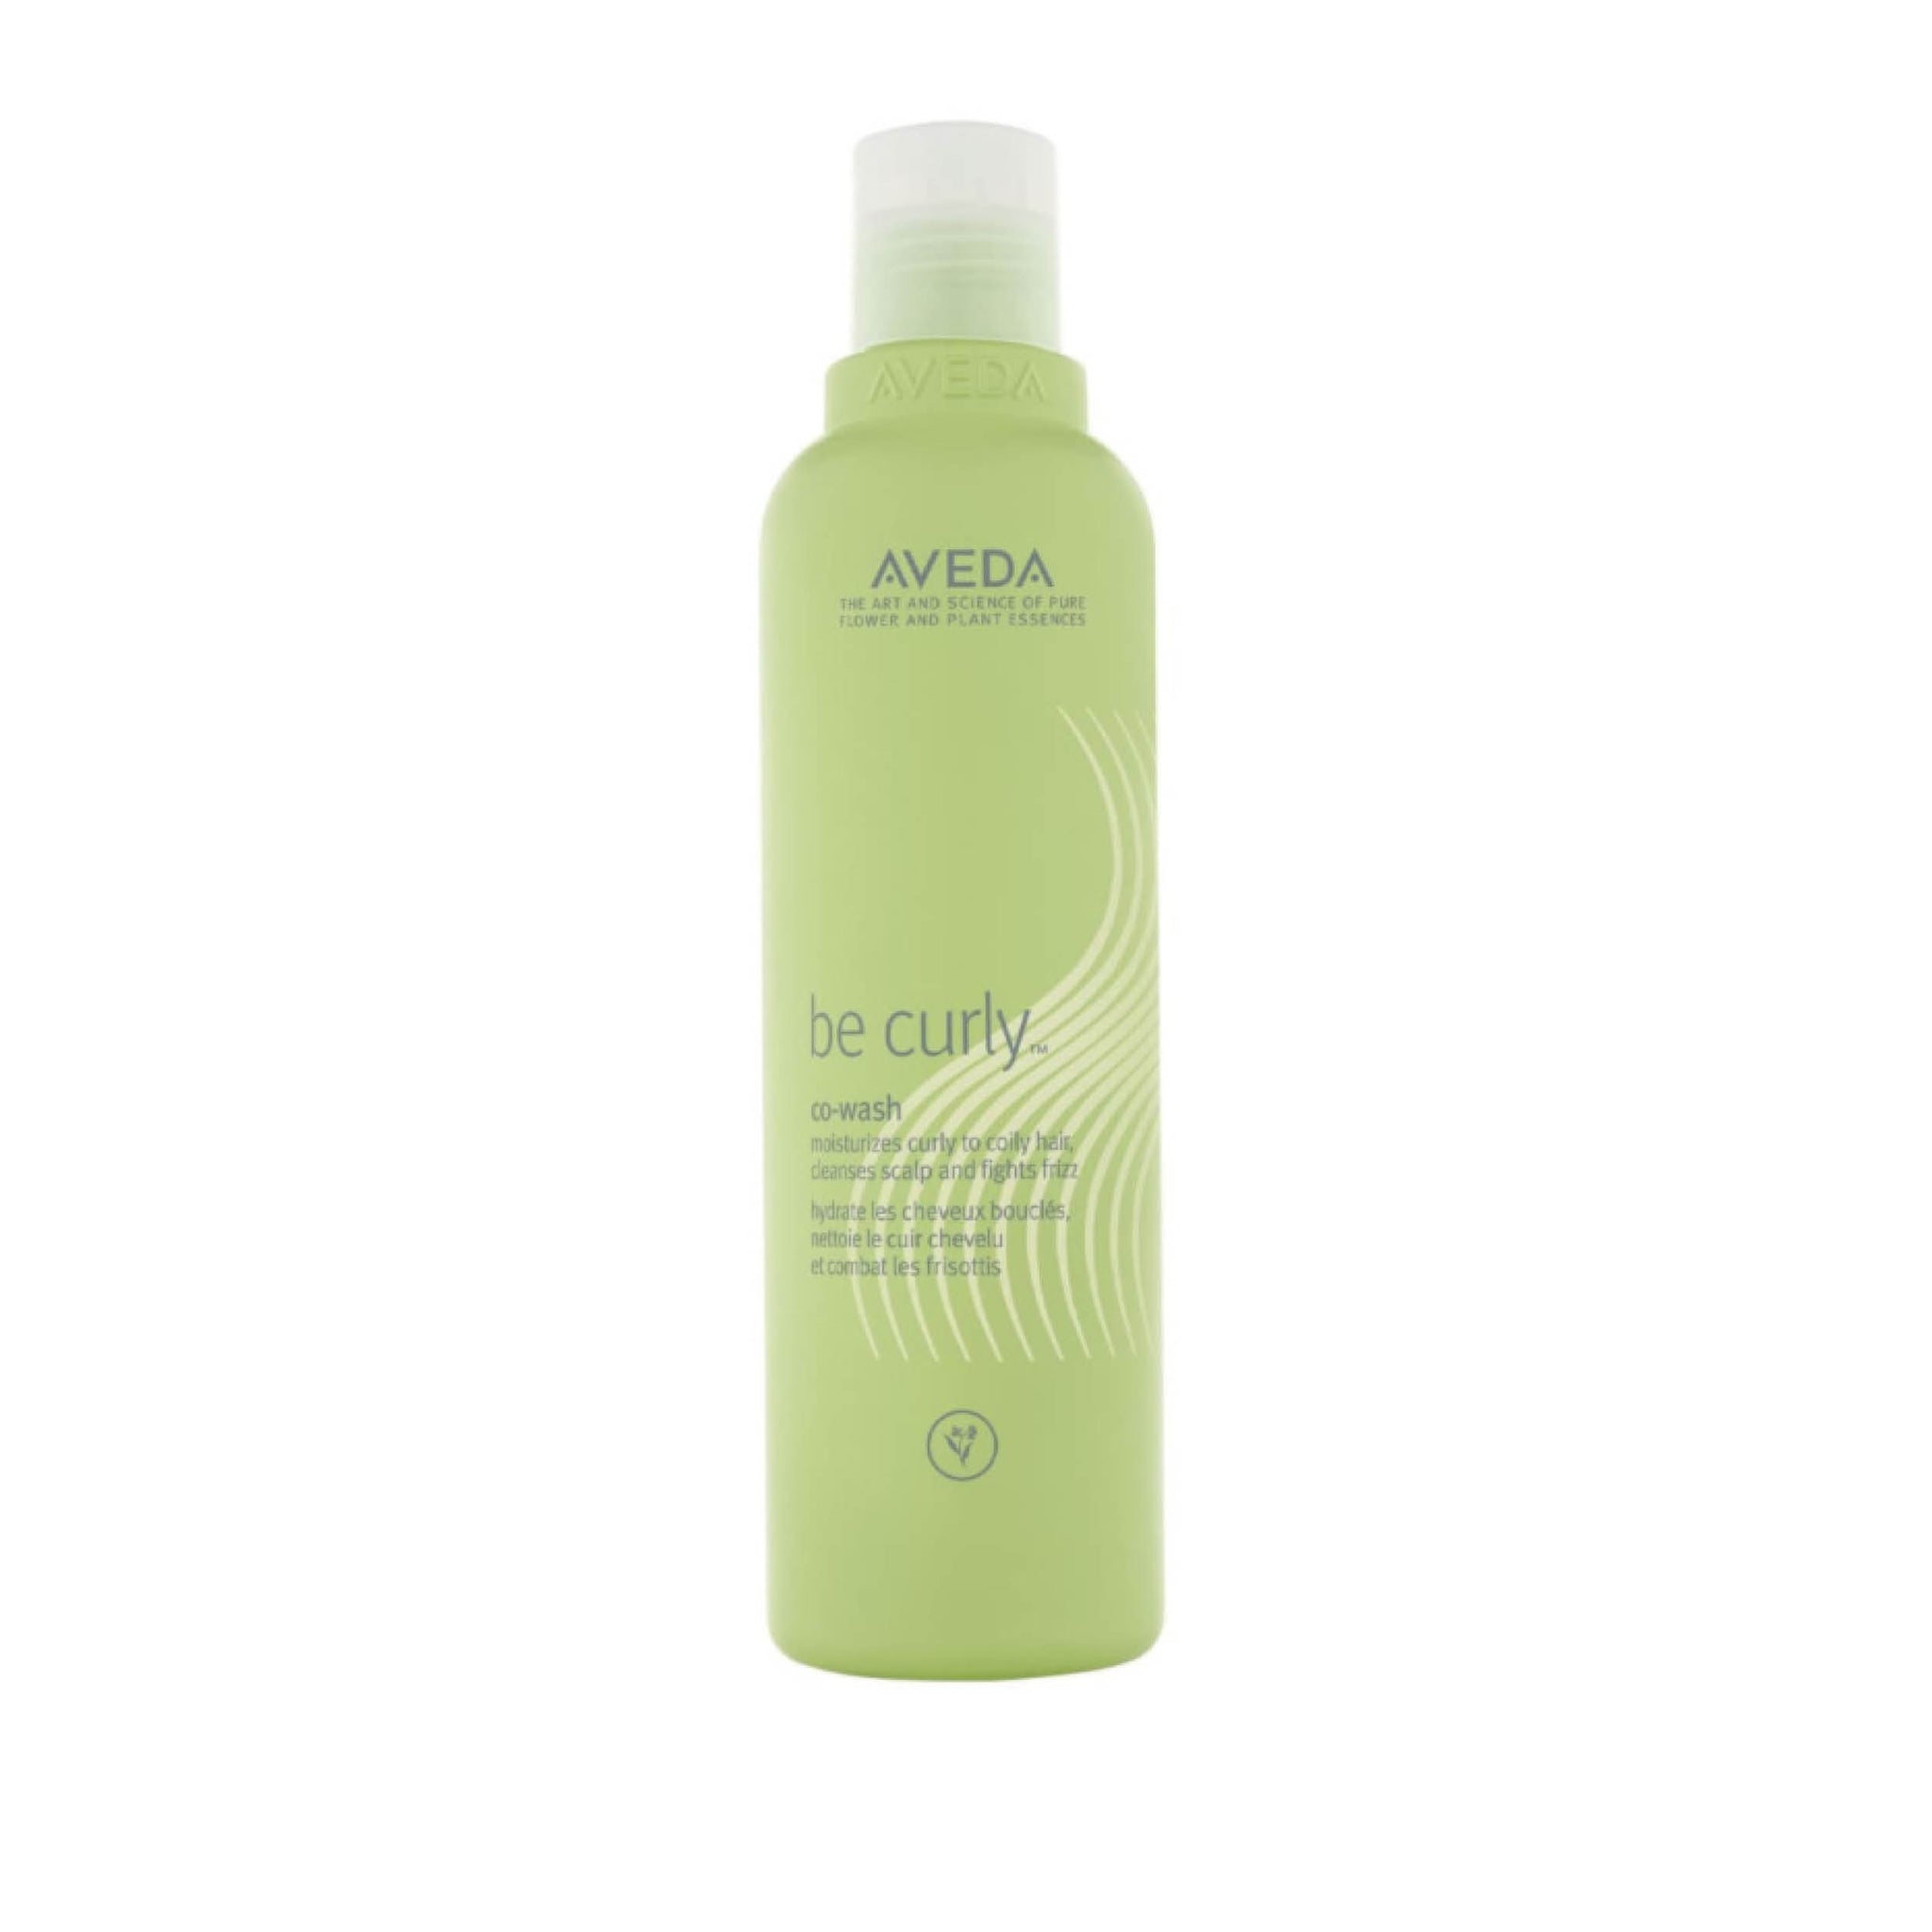 Aveda Be Curly Co-wash.